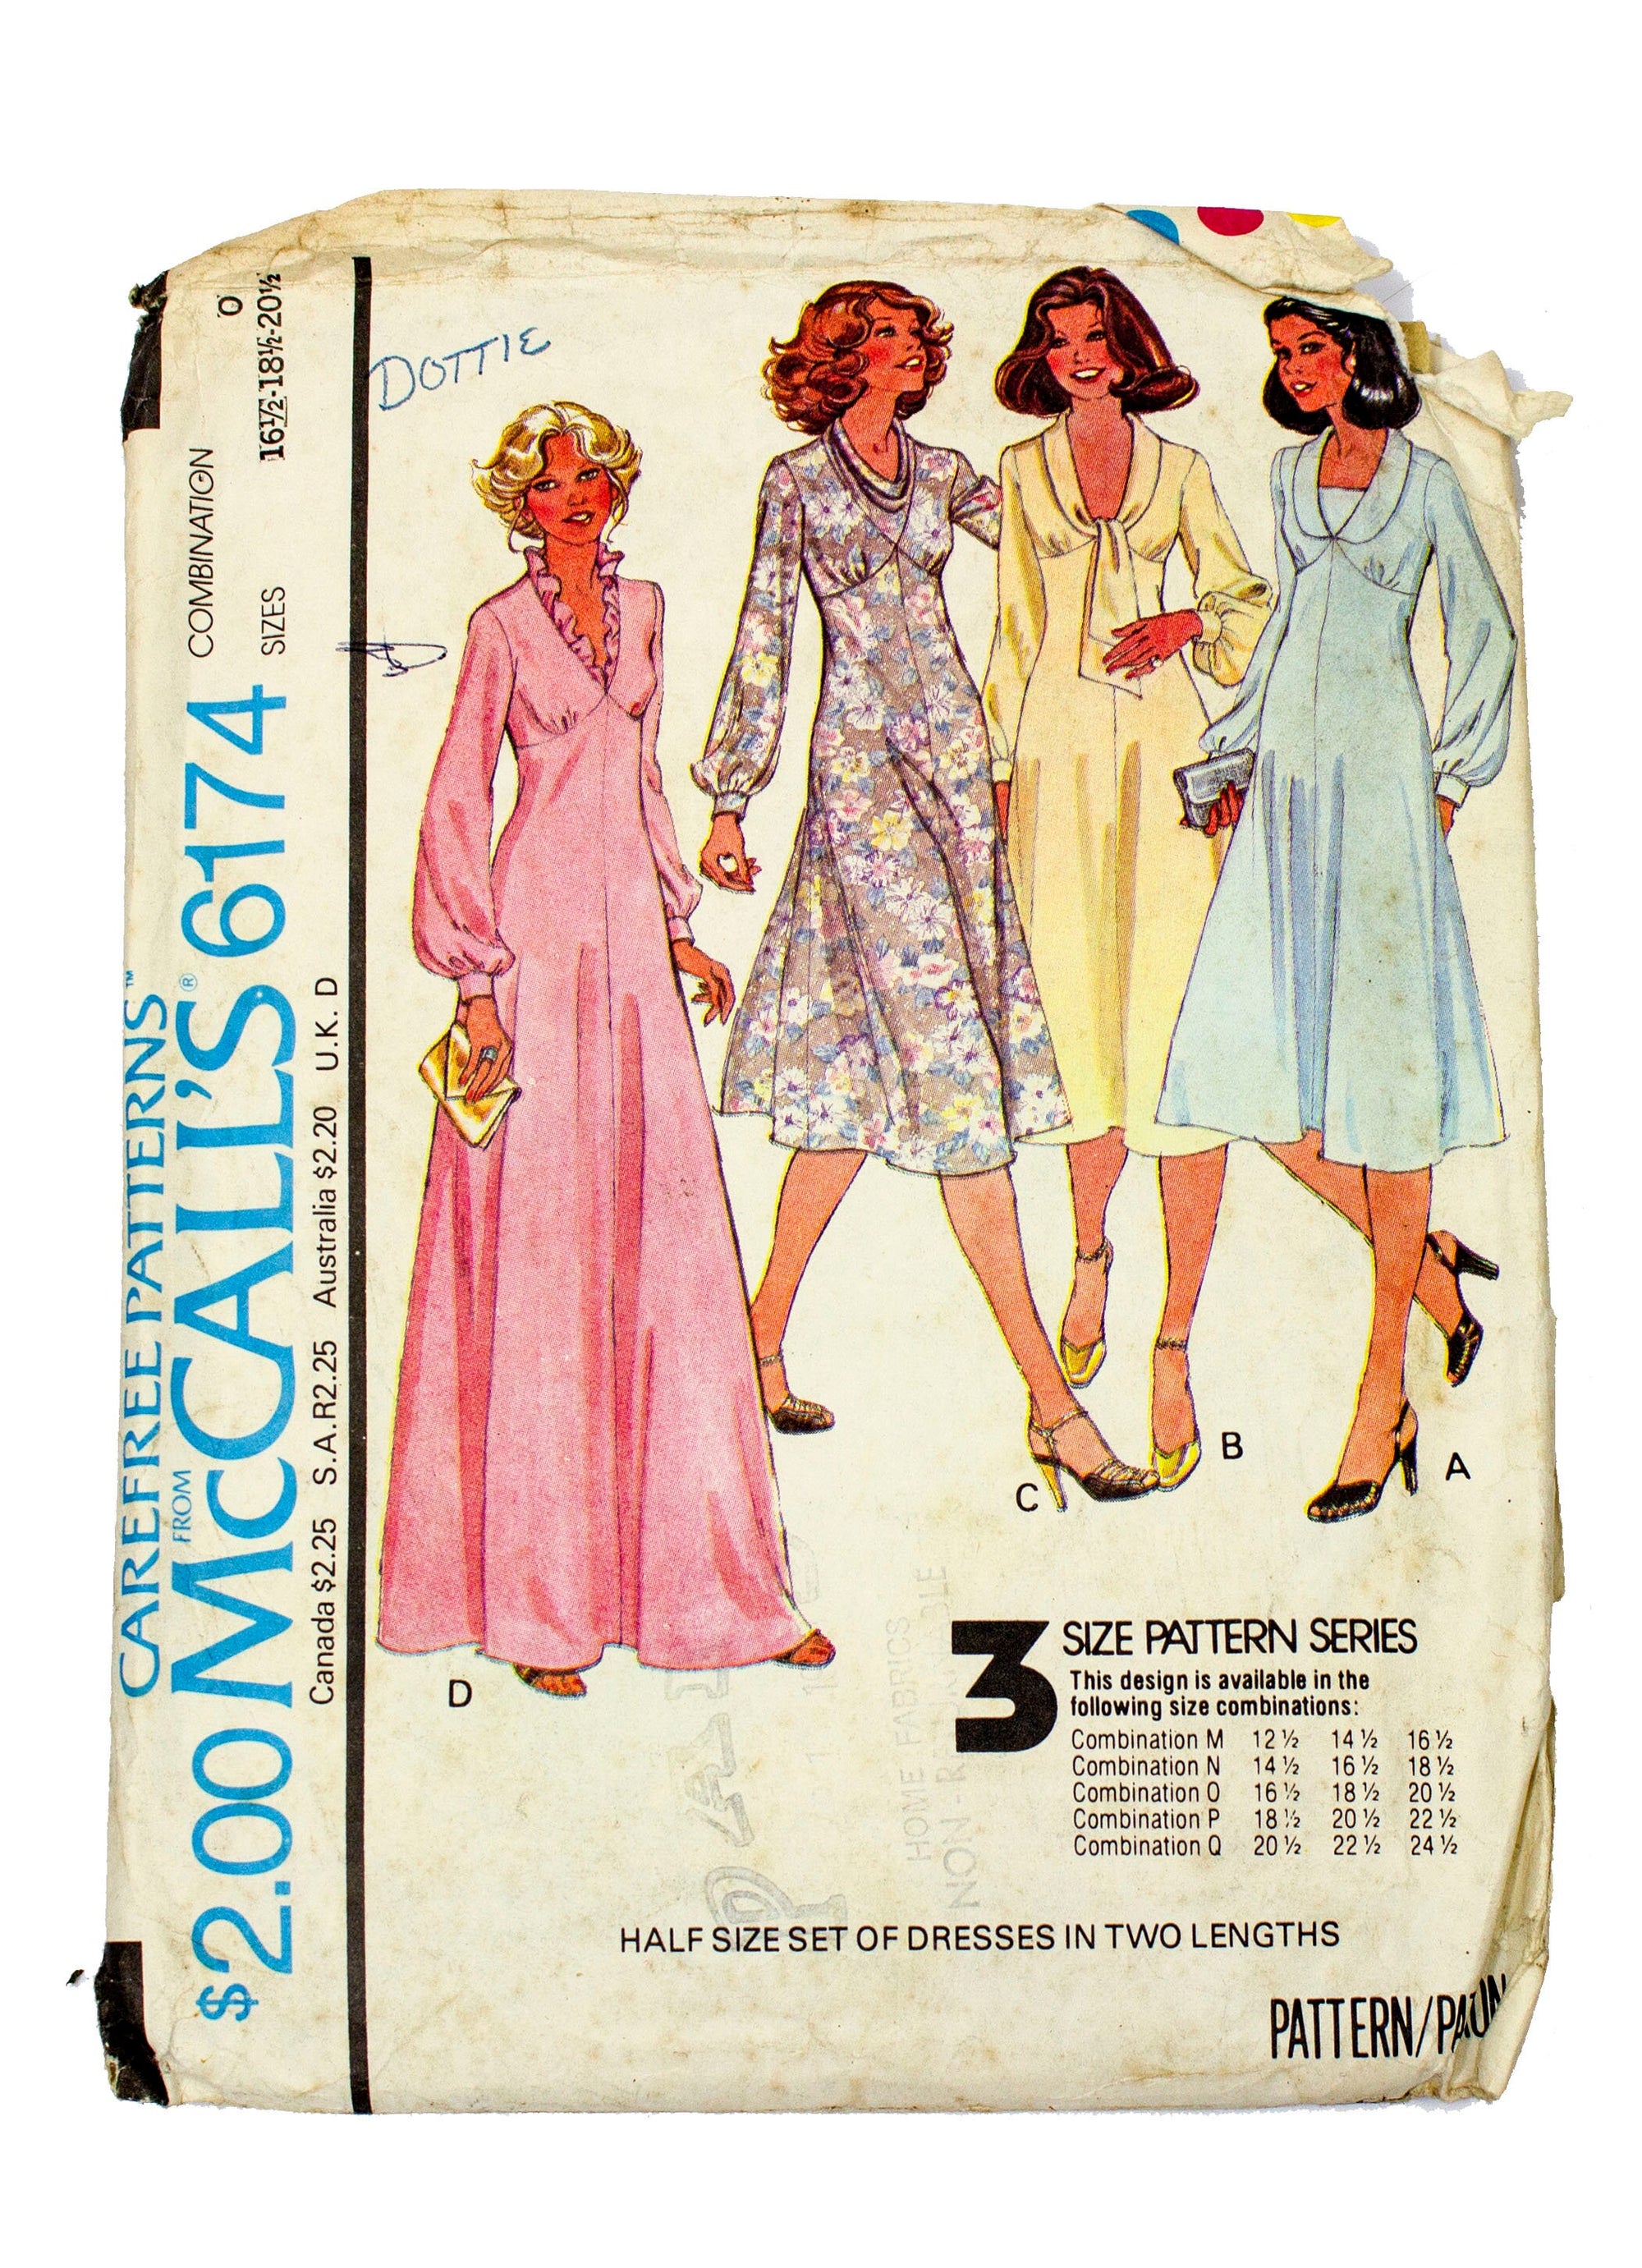 McCall's 6174 Womens Bell Sleeve Dress in Two Lengths - Size 16 1/2 - 20 1/2